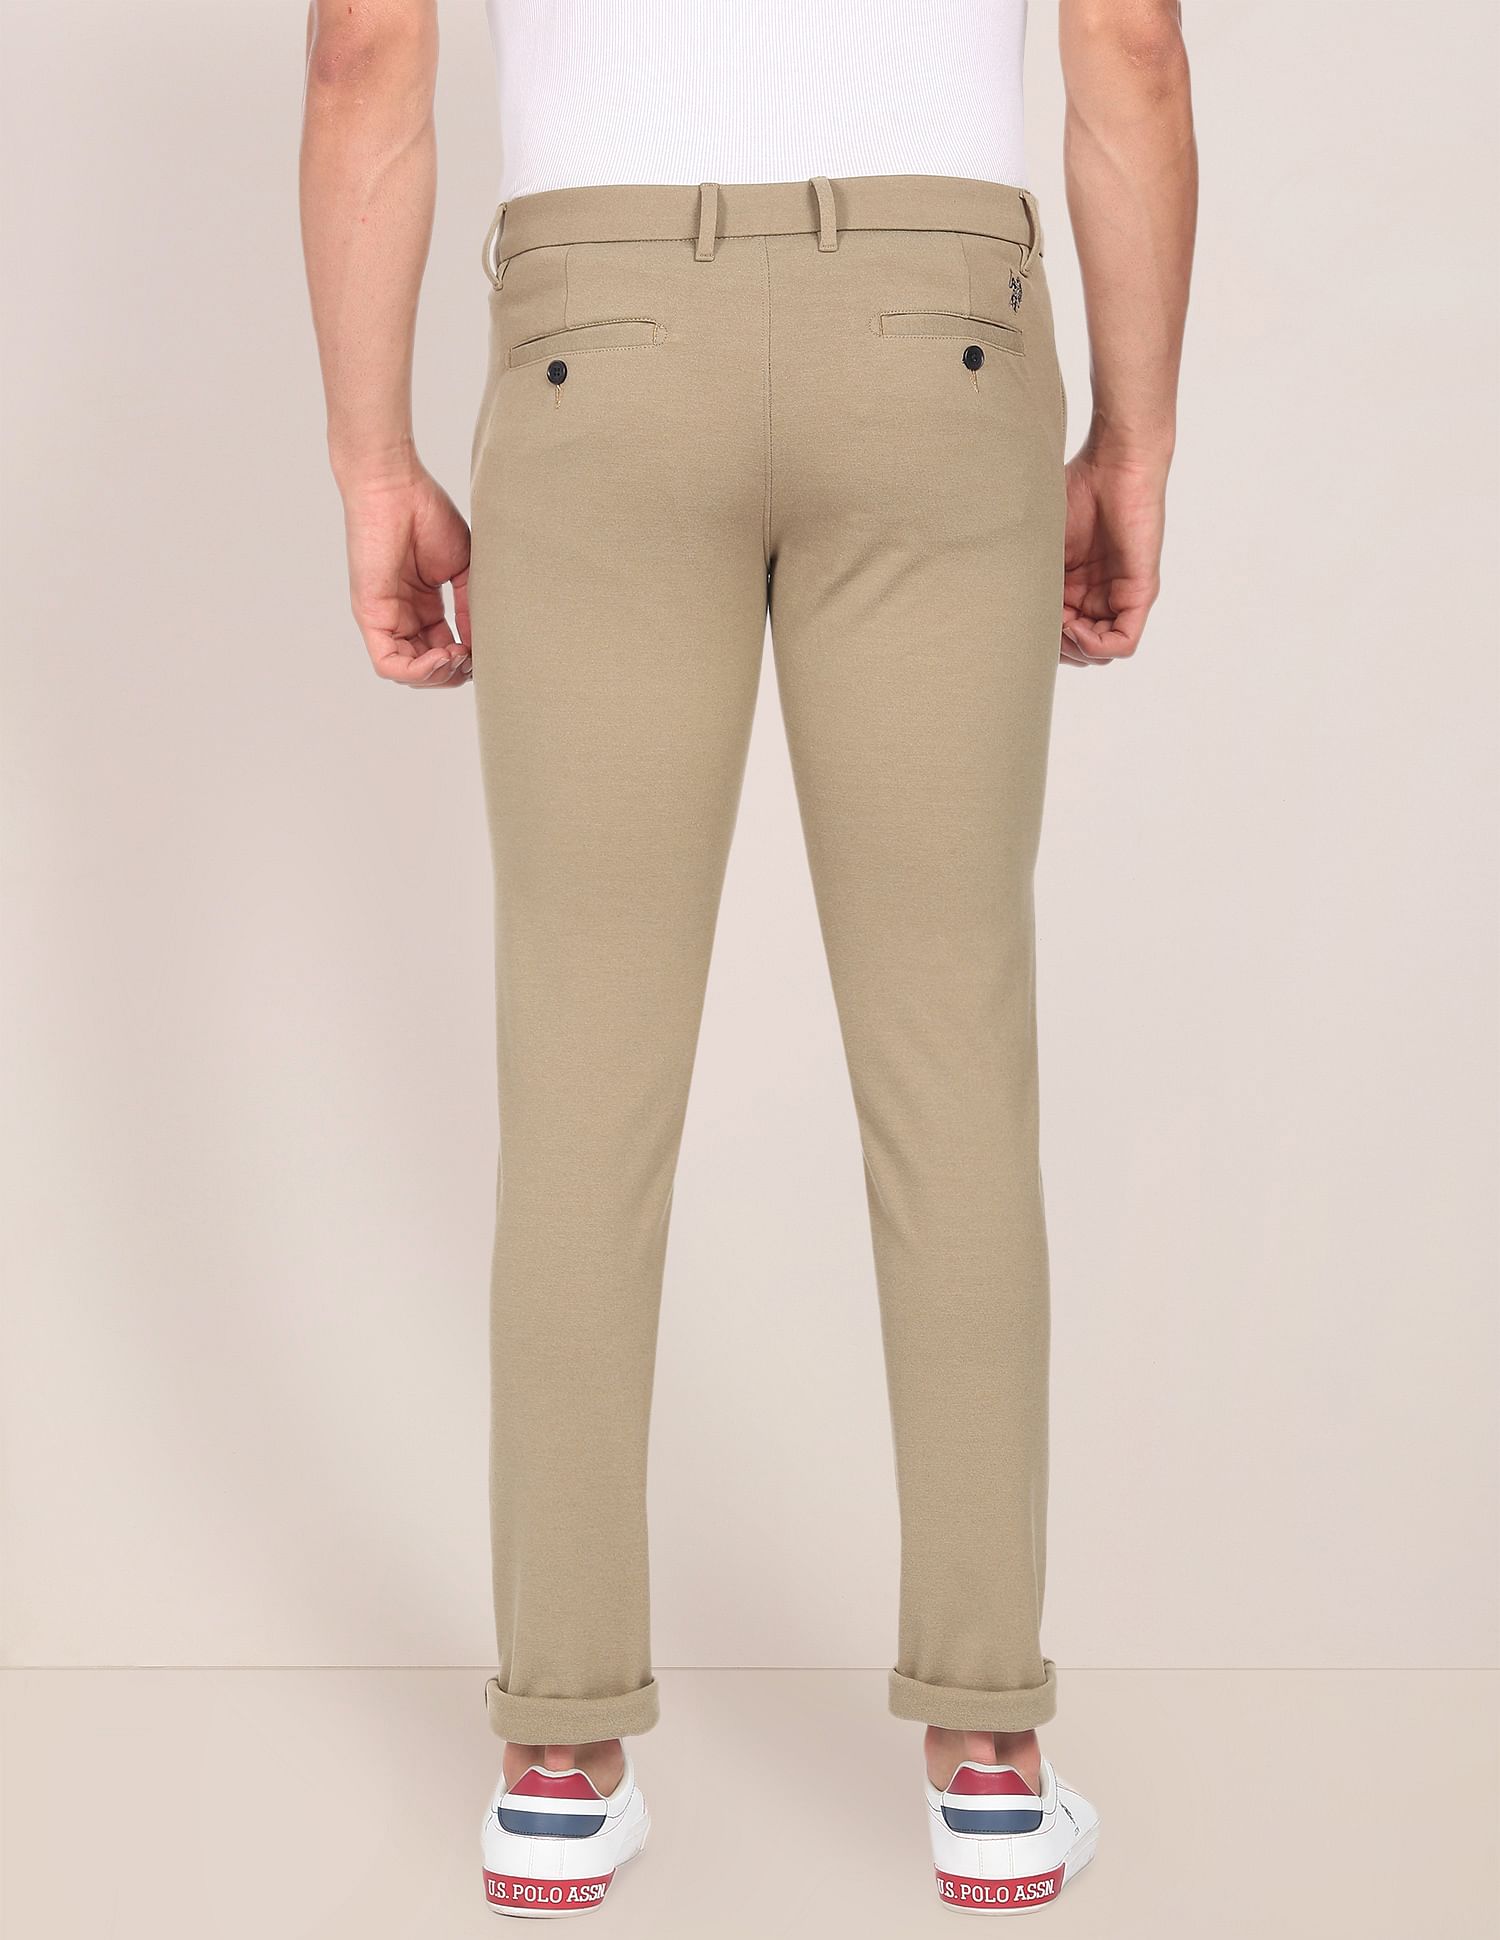 US POLO ASSN Casual Trousers  Buy US POLO ASSN Solid Slim Fit  Trousers Online  Nykaa Fashion